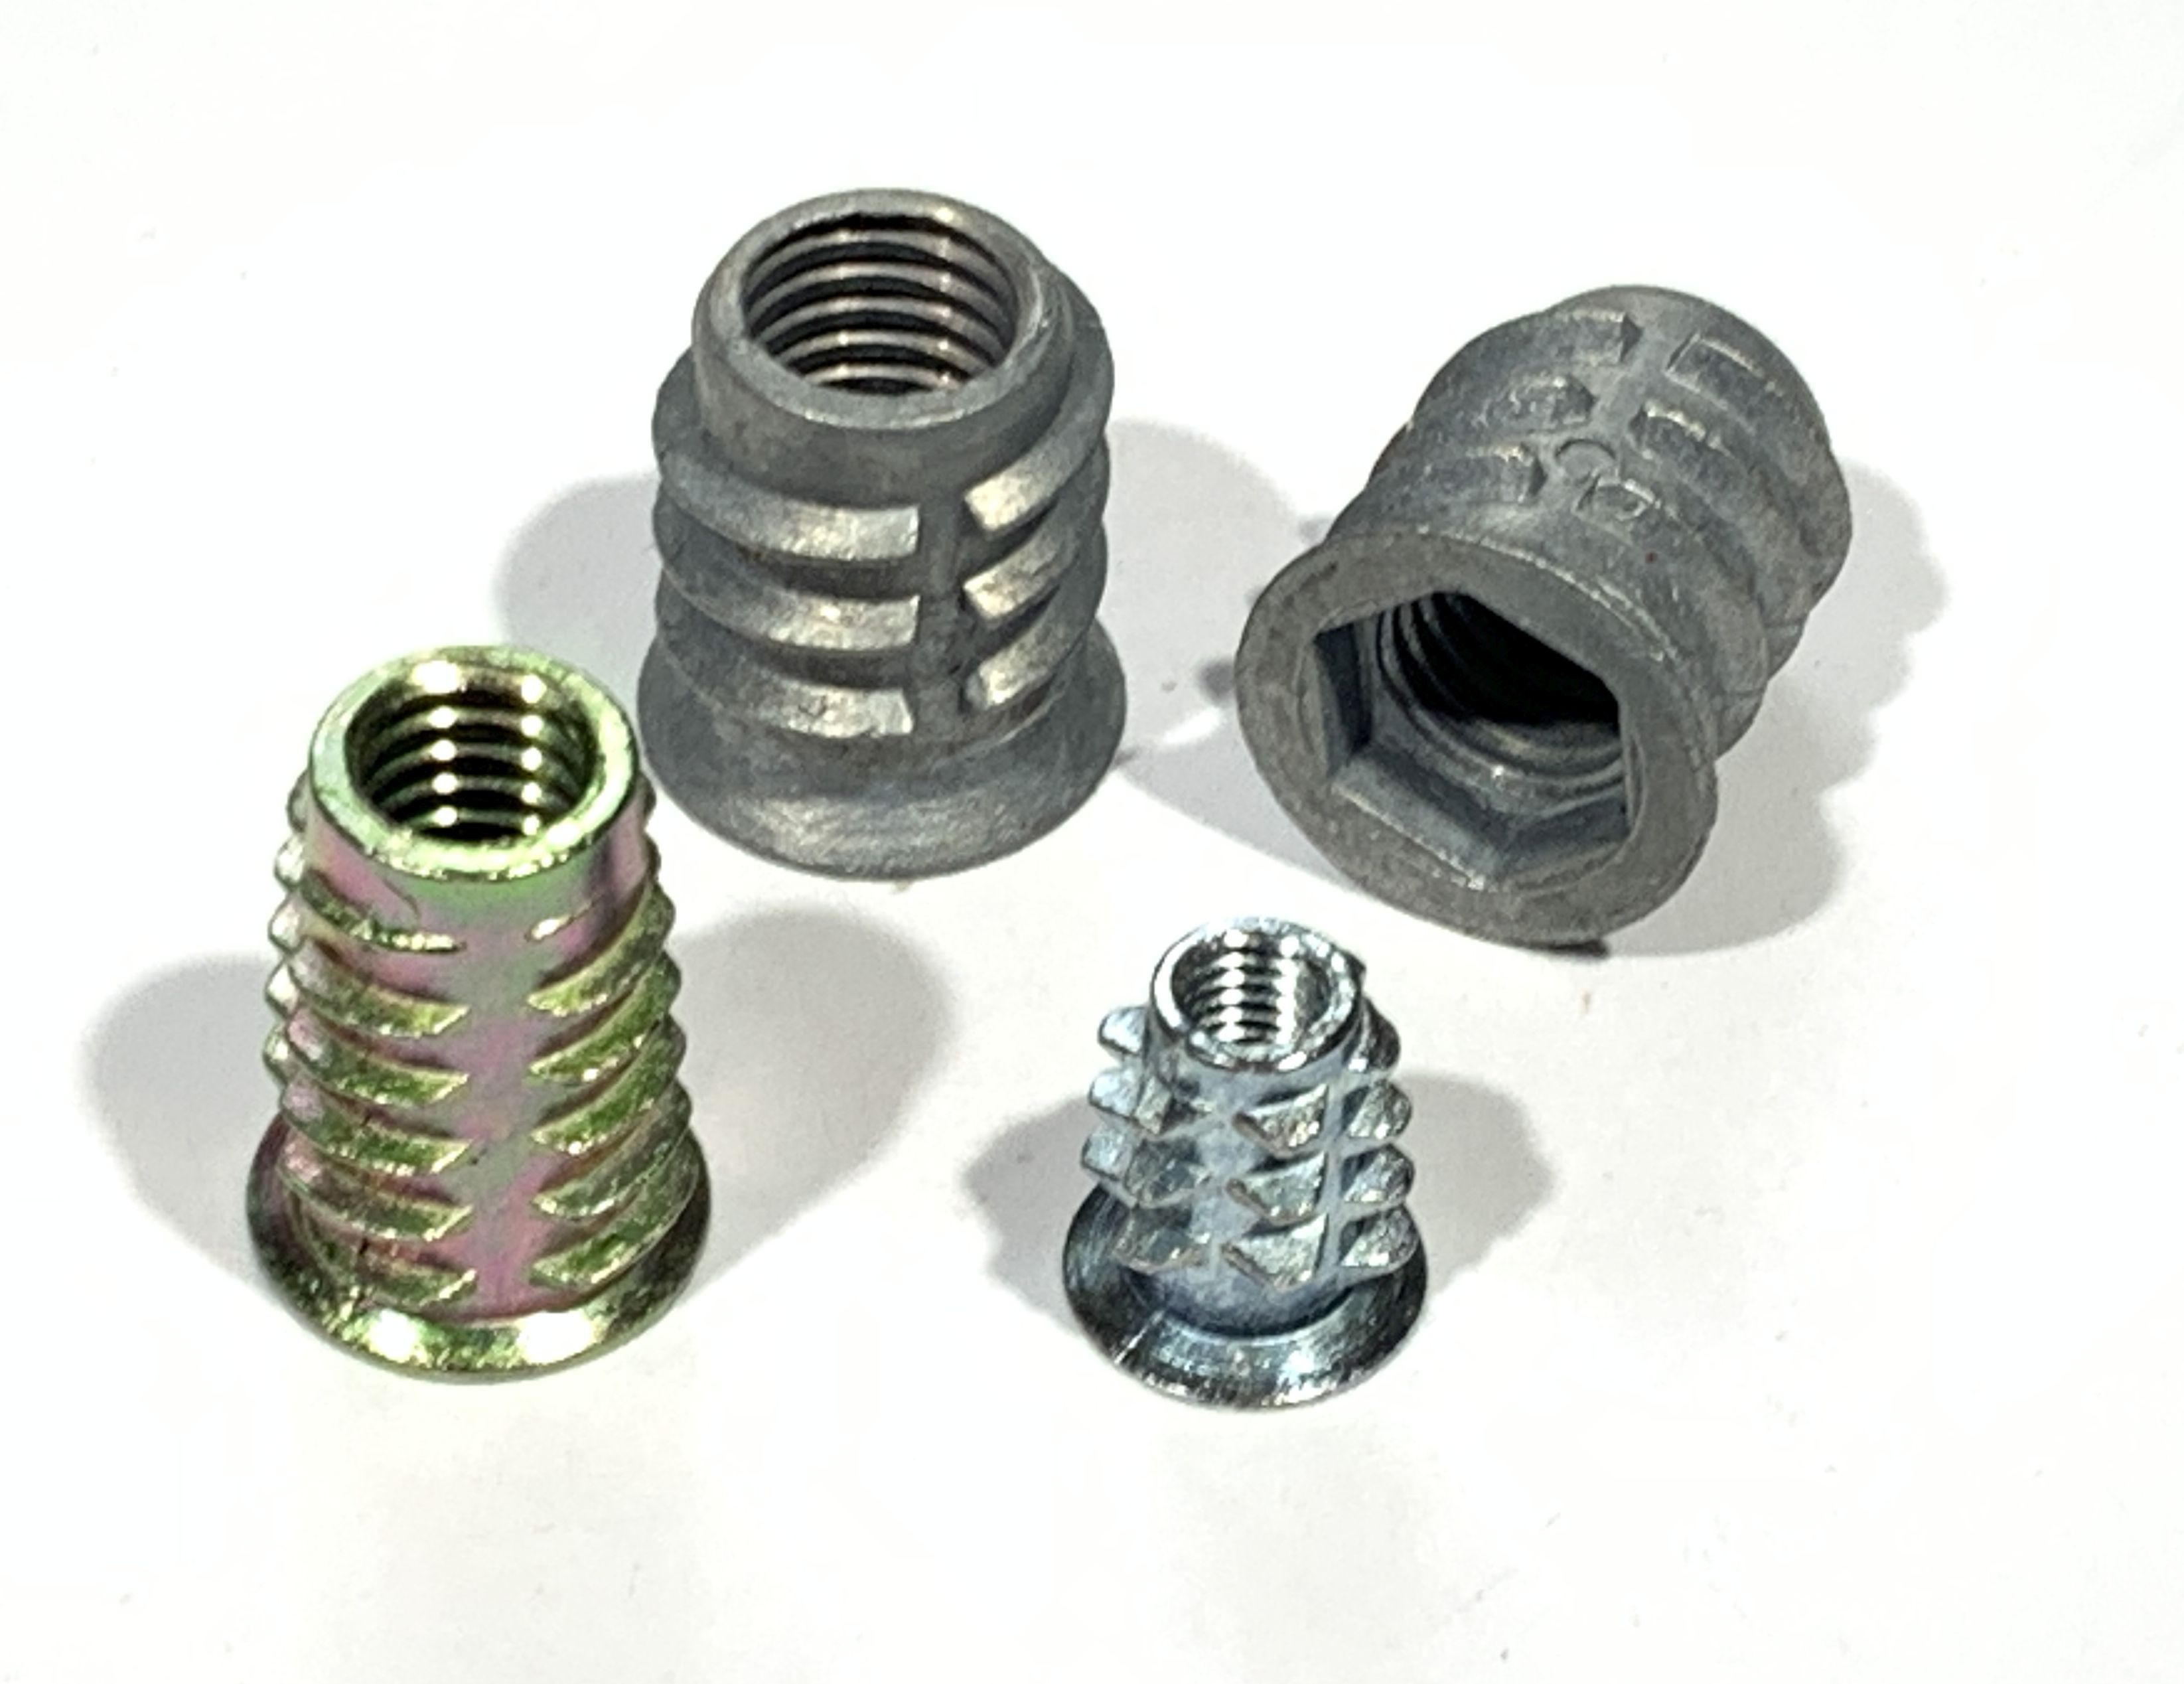 M6 6mm x 1.0 Steel Threaded Inserts for Wood 15mm High for 8mm Hole 